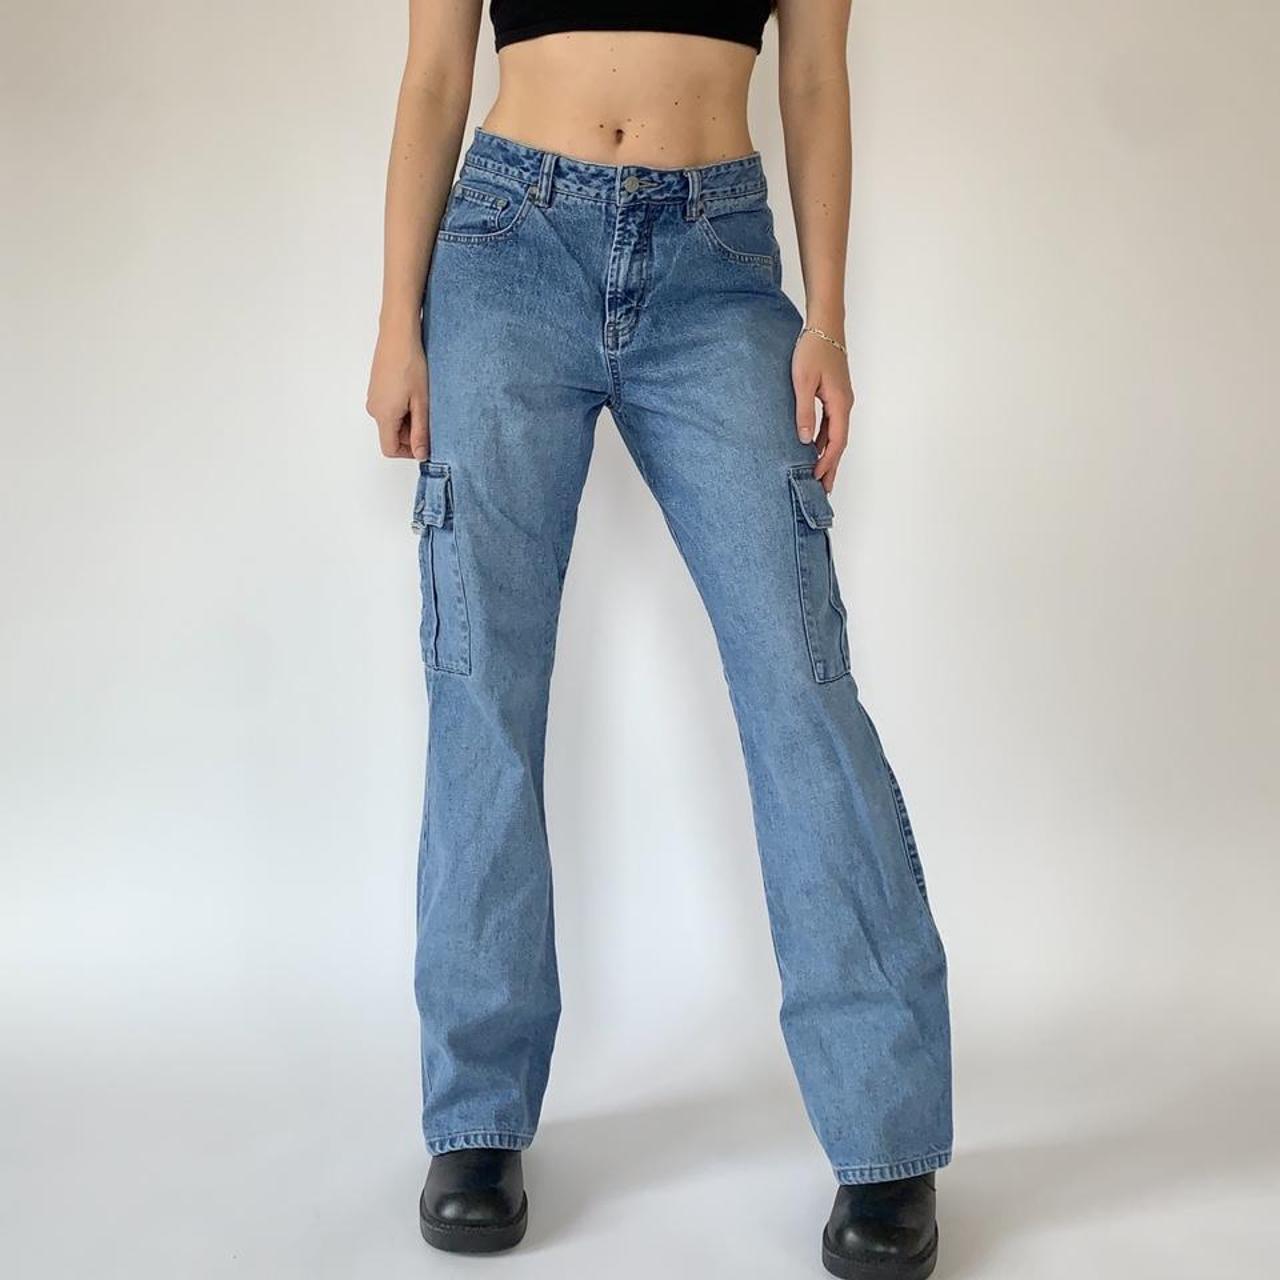 Vintage 1990s Unionbay cargo jeans. High rise with a... - Depop